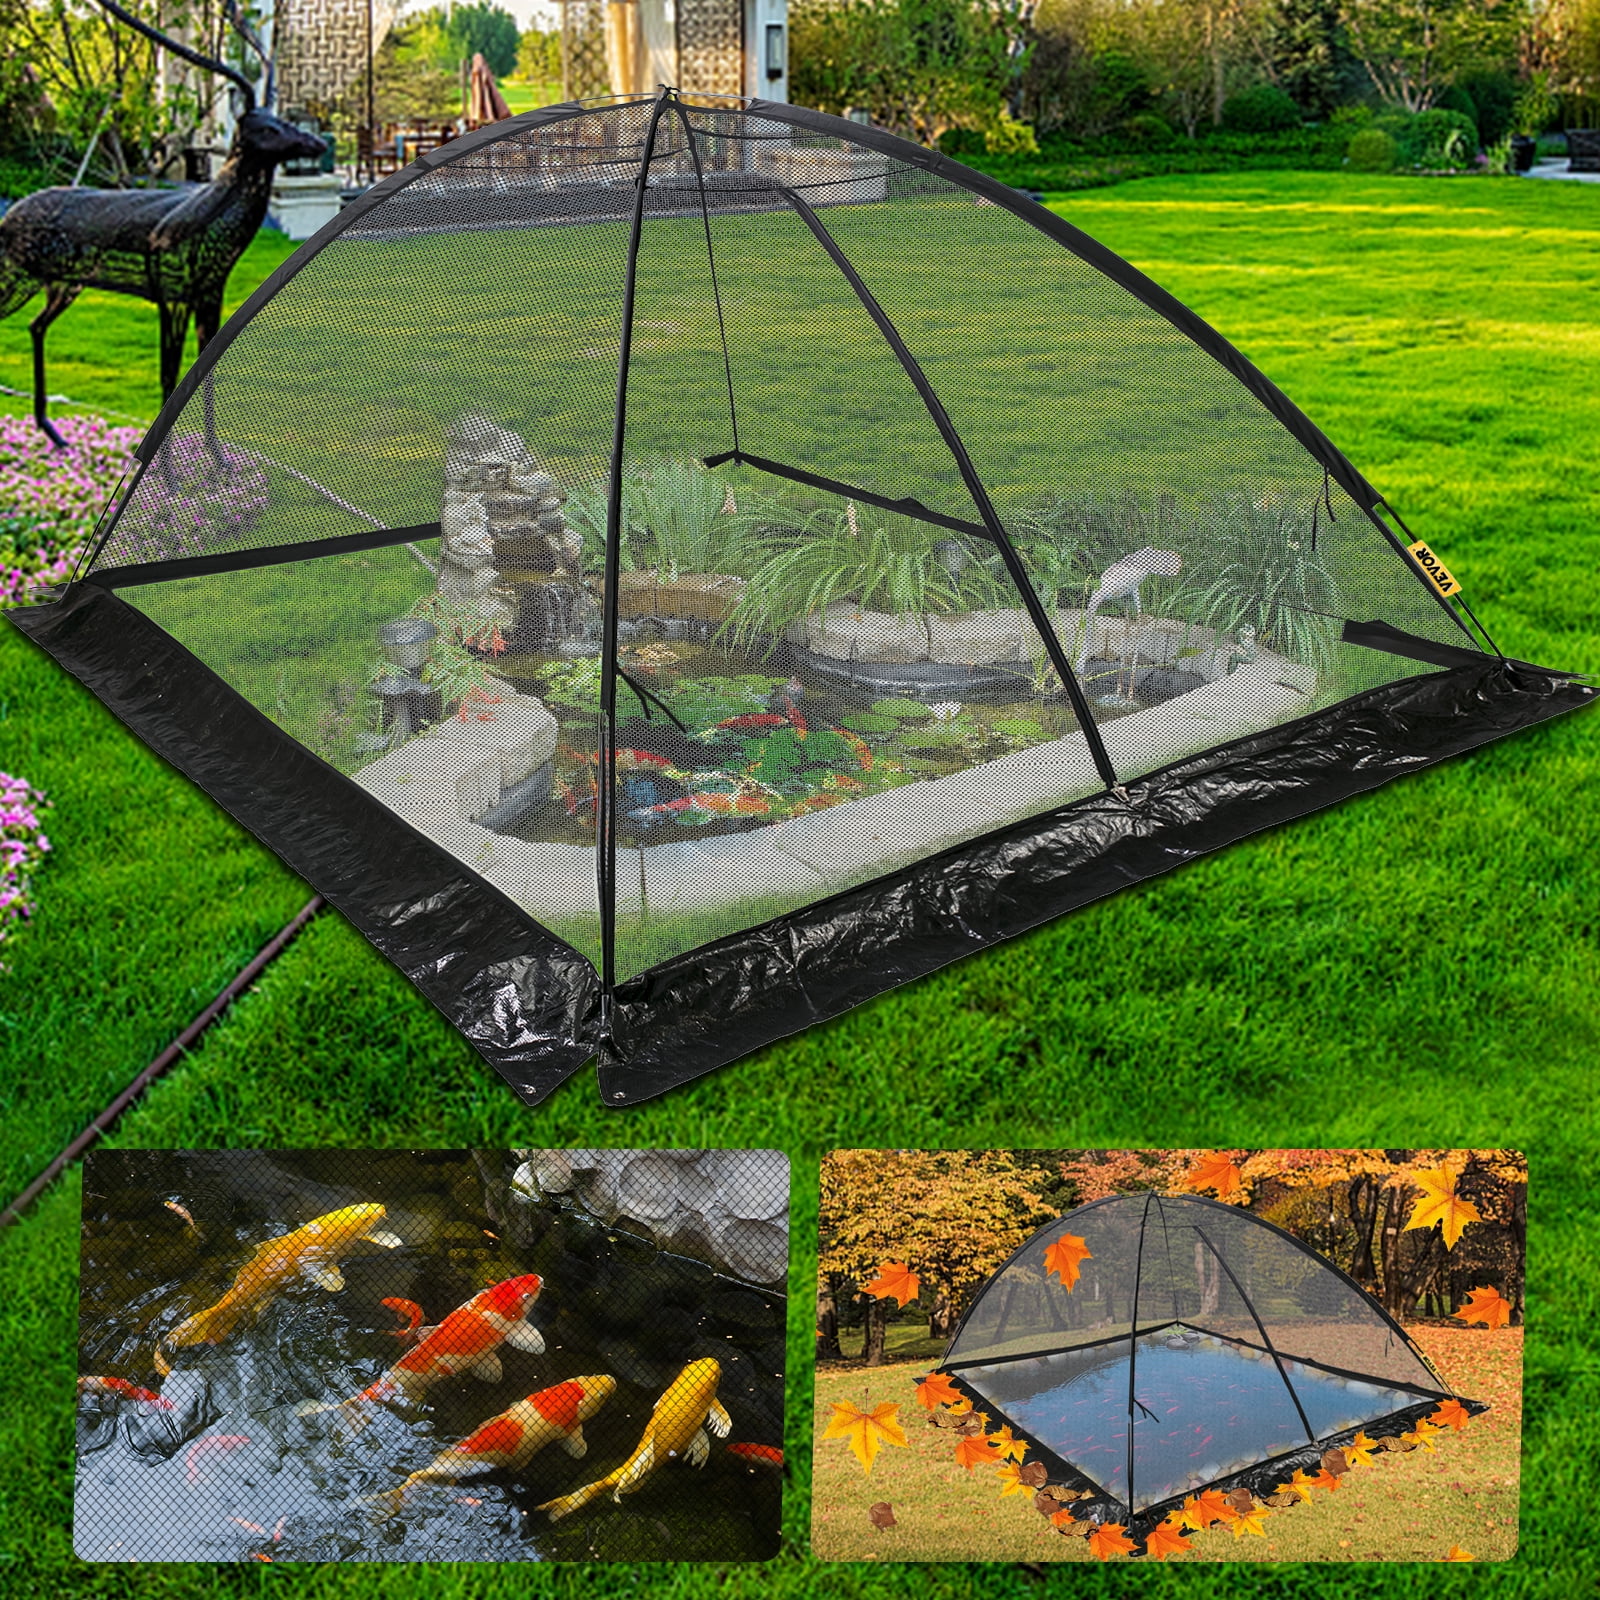 VEVORbrand Pond Cover Dome, 13x17 FT Garden Pond Net, 1/2 inch Mesh Dome  Pond Net Covers with Zipper and Wind Rope, Black Nylon Pond Netting for  Pond